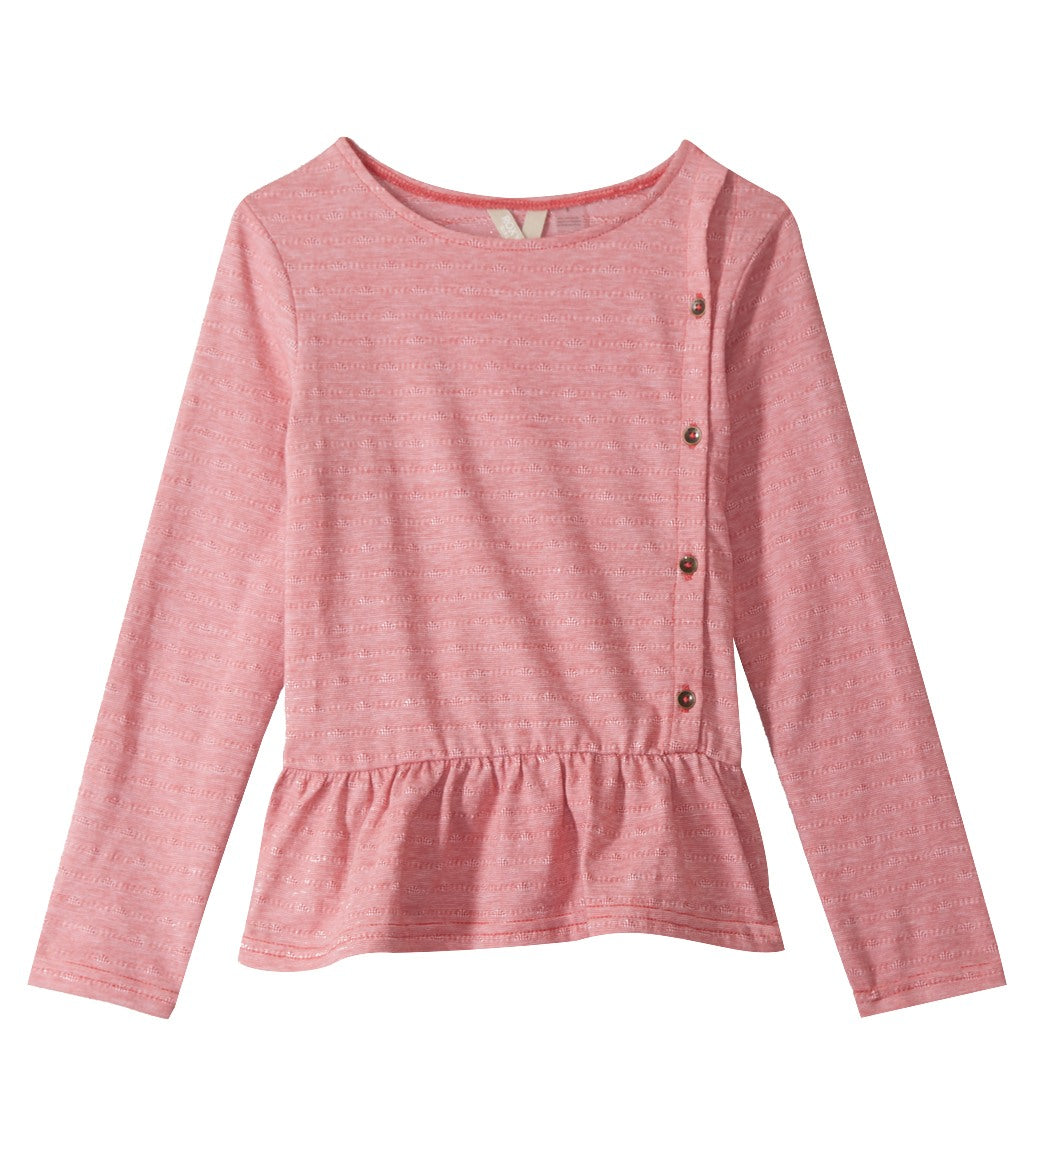 Roxy Girls' Love Is Bright Peplum Top Toddler Kid - Mineral Red 4 Cotton - Swimoutlet.com